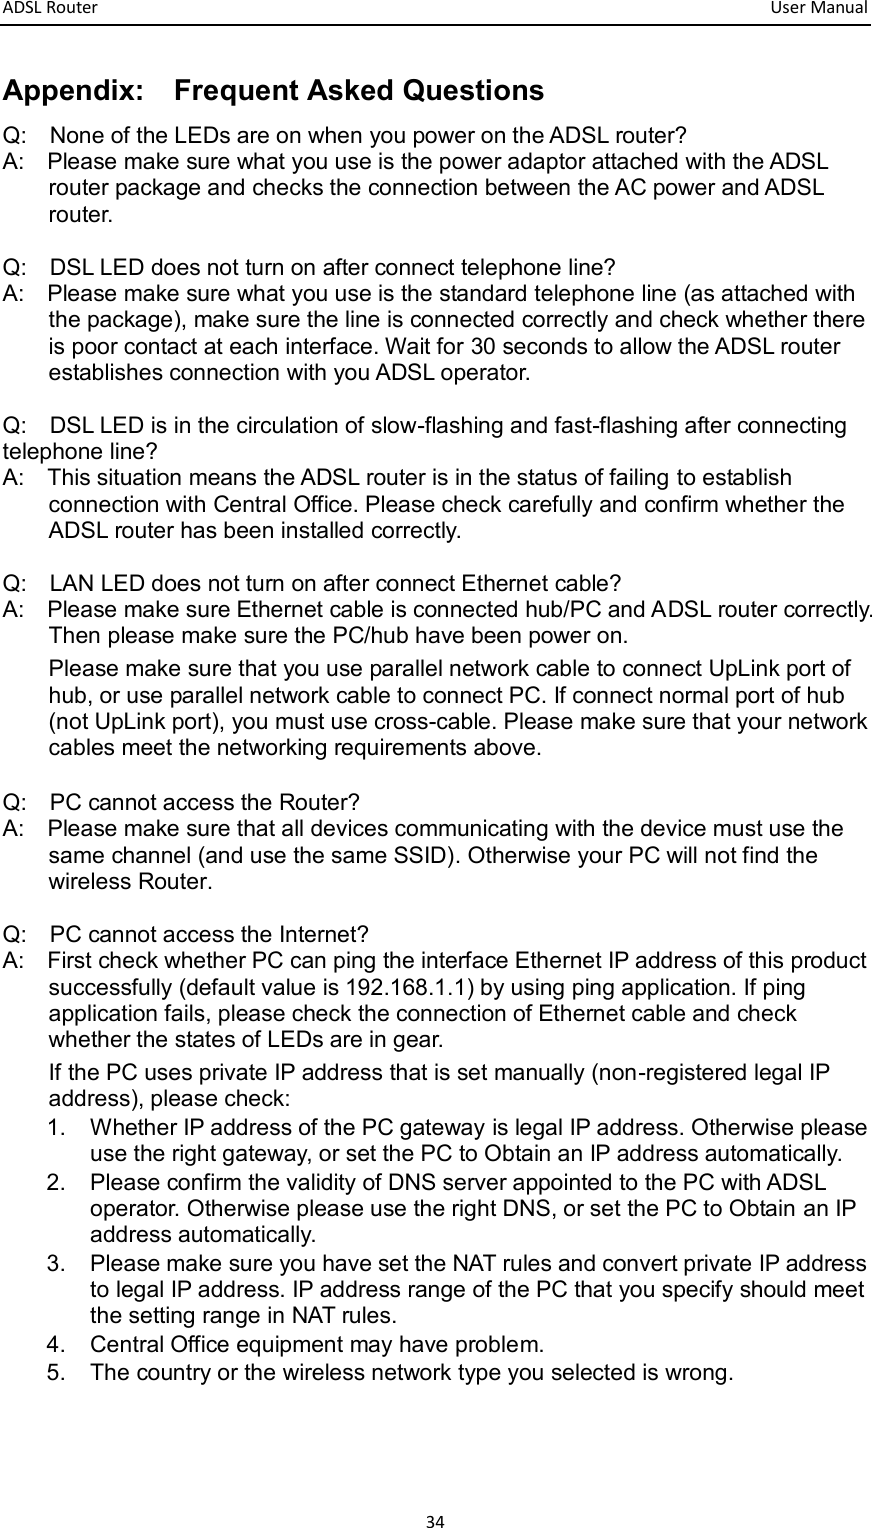 ADSL Router       User Manual 34 Appendix:    Frequent Asked Questions   Q:    None of the LEDs are on when you power on the ADSL router? A:    Please make sure what you use is the power adaptor attached with the ADSL router package and checks the connection between the AC power and ADSL router.    Q:    DSL LED does not turn on after connect telephone line? A:    Please make sure what you use is the standard telephone line (as attached with the package), make sure the line is connected correctly and check whether there is poor contact at each interface. Wait for 30 seconds to allow the ADSL router establishes connection with you ADSL operator.    Q:    DSL LED is in the circulation of slow-flashing and fast-flashing after connecting telephone line? A:    This situation means the ADSL router is in the status of failing to establish connection with Central Office. Please check carefully and confirm whether the ADSL router has been installed correctly.  Q:    LAN LED does not turn on after connect Ethernet cable? A:    Please make sure Ethernet cable is connected hub/PC and ADSL router correctly. Then please make sure the PC/hub have been power on. Please make sure that you use parallel network cable to connect UpLink port of hub, or use parallel network cable to connect PC. If connect normal port of hub (not UpLink port), you must use cross-cable. Please make sure that your network cables meet the networking requirements above.  Q:    PC cannot access the Router? A:    Please make sure that all devices communicating with the device must use the same channel (and use the same SSID). Otherwise your PC will not find the wireless Router.  Q:    PC cannot access the Internet?   A:    First check whether PC can ping the interface Ethernet IP address of this product successfully (default value is 192.168.1.1) by using ping application. If ping application fails, please check the connection of Ethernet cable and check whether the states of LEDs are in gear. If the PC uses private IP address that is set manually (non-registered legal IP address), please check: 1.  Whether IP address of the PC gateway is legal IP address. Otherwise please use the right gateway, or set the PC to Obtain an IP address automatically. 2.  Please confirm the validity of DNS server appointed to the PC with ADSL operator. Otherwise please use the right DNS, or set the PC to Obtain an IP address automatically.   3.  Please make sure you have set the NAT rules and convert private IP address to legal IP address. IP address range of the PC that you specify should meet the setting range in NAT rules.   4.  Central Office equipment may have problem. 5.  The country or the wireless network type you selected is wrong.       